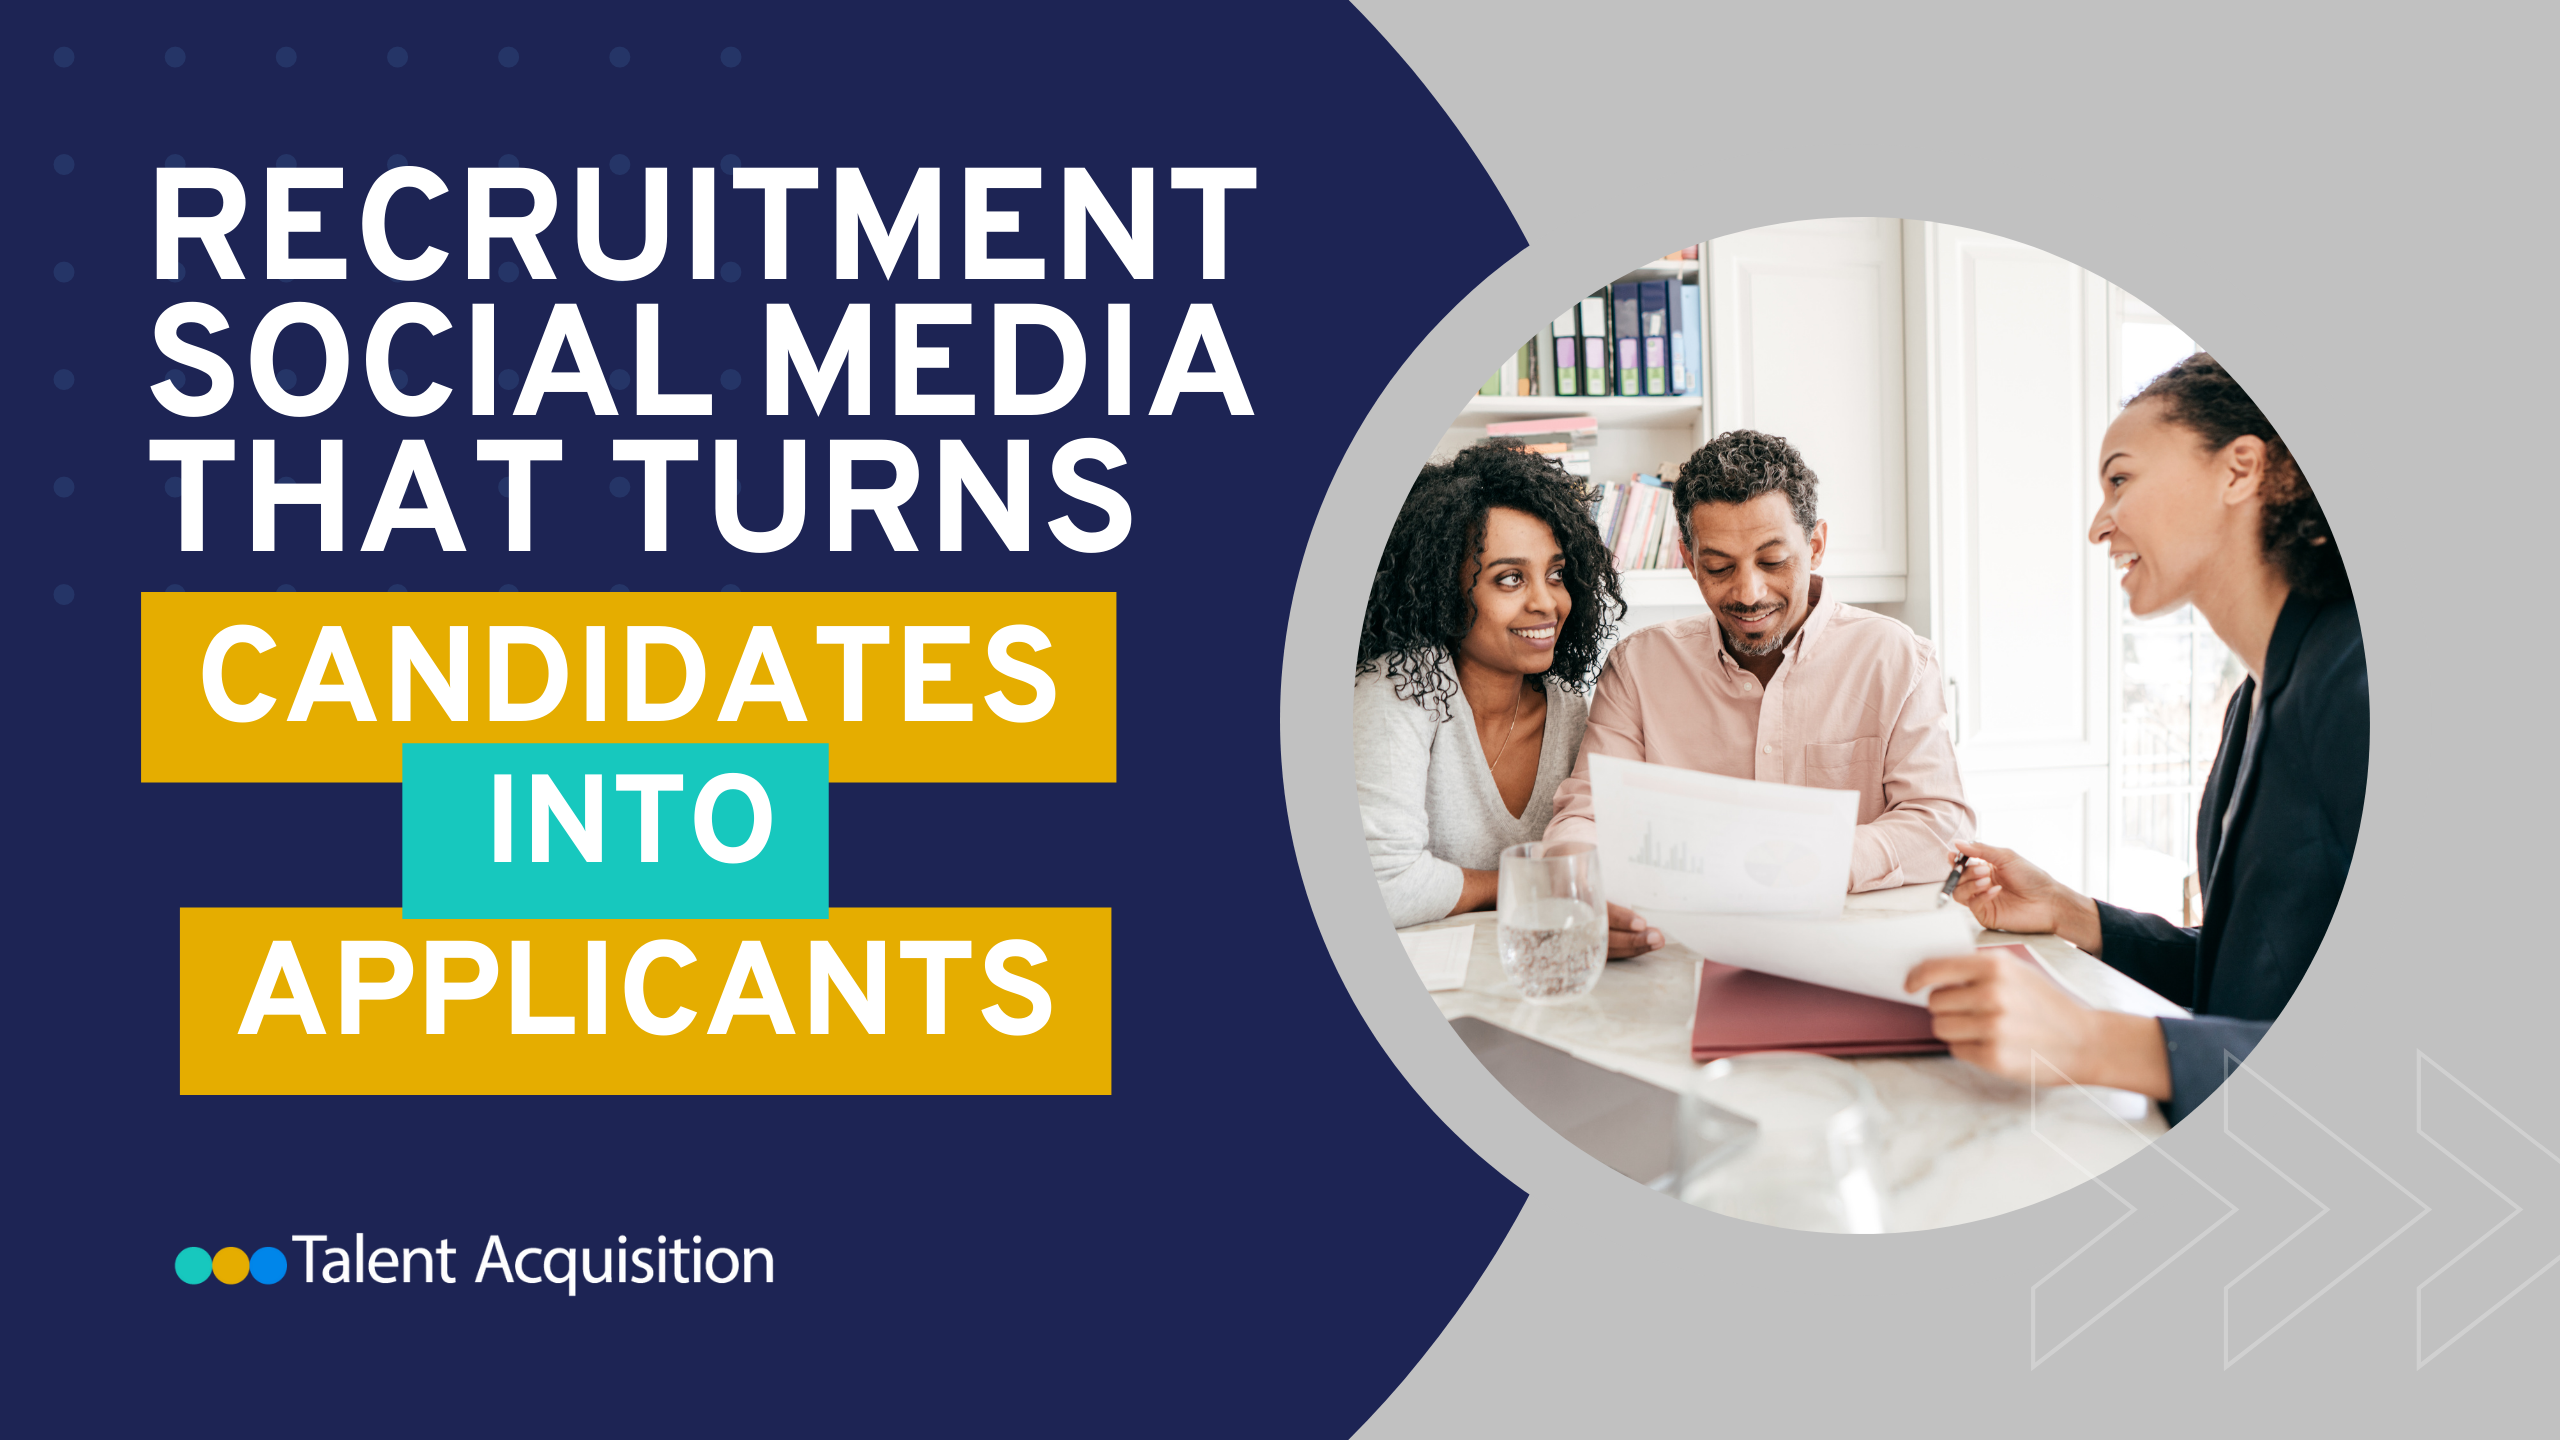 Social Media that Turns Candidates into Applicants